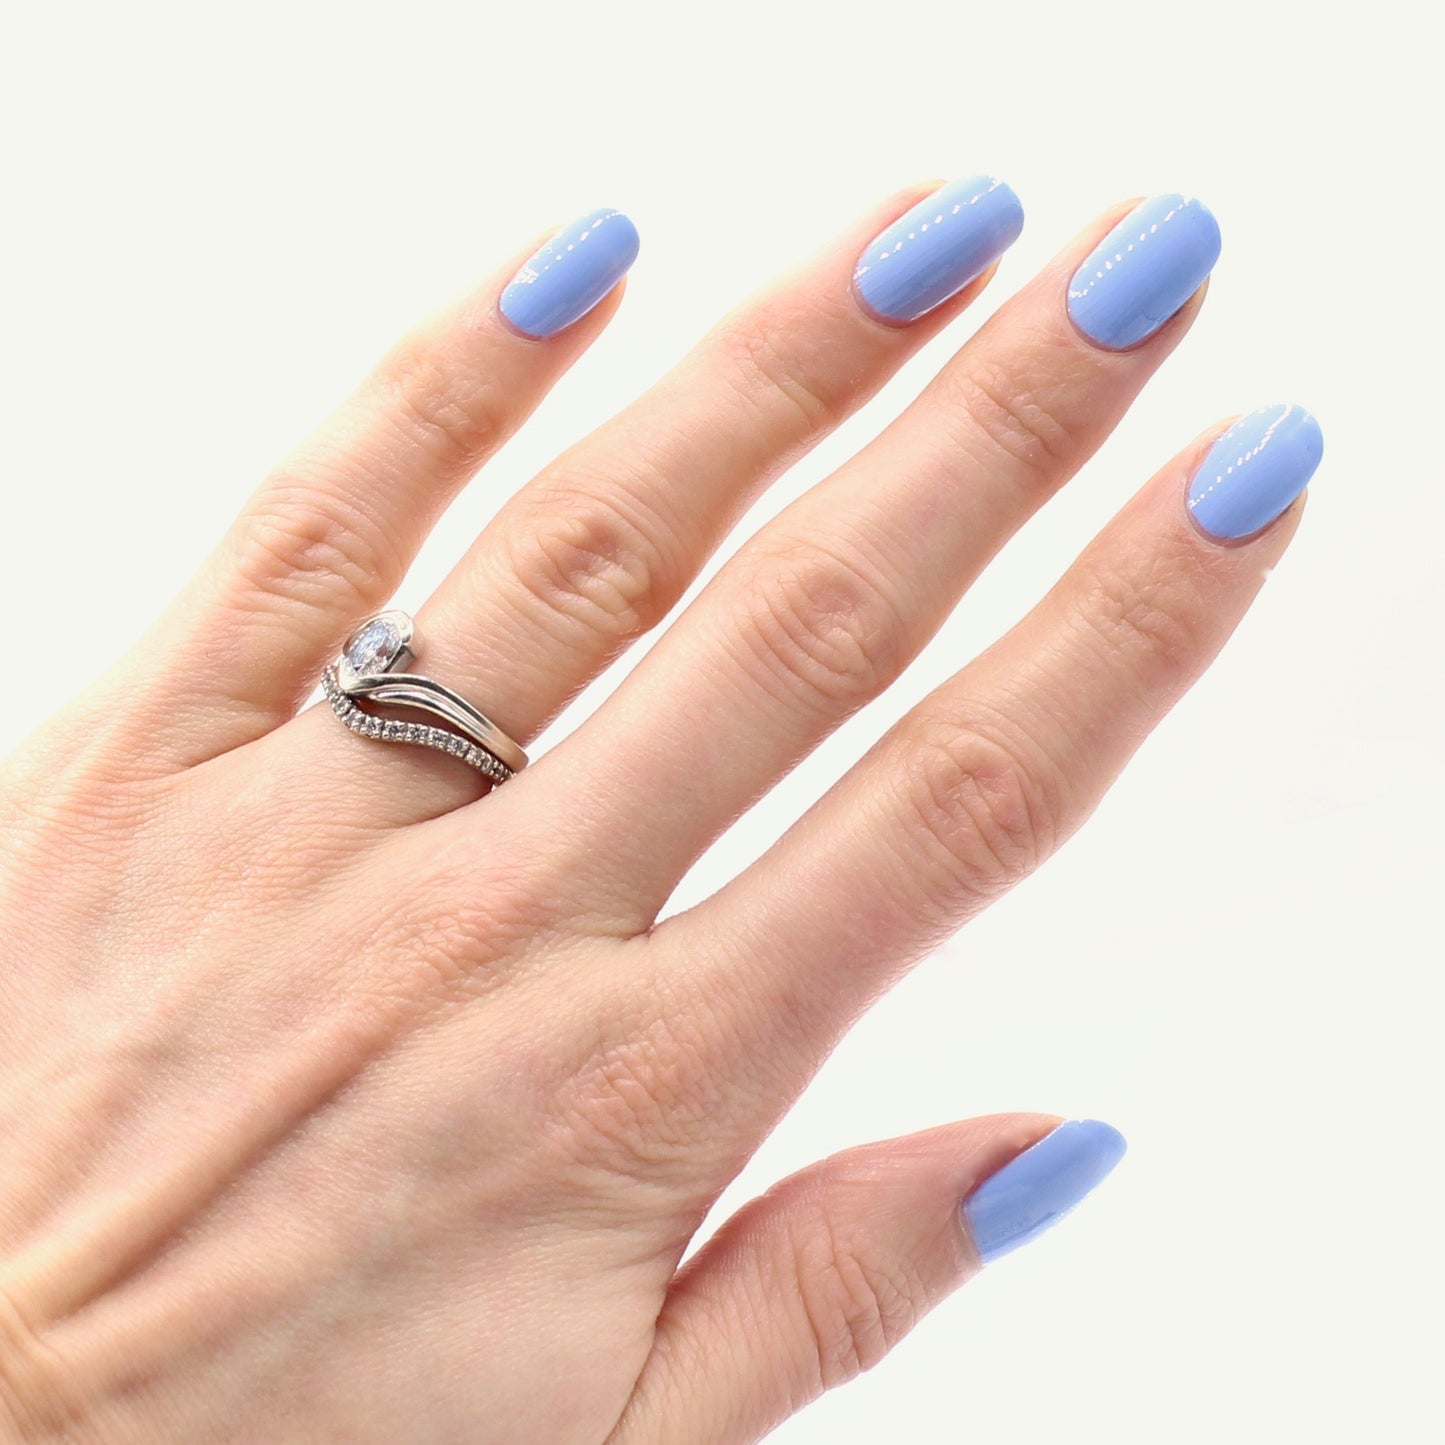 Periwinkle nail polish swatch on pale skin tone